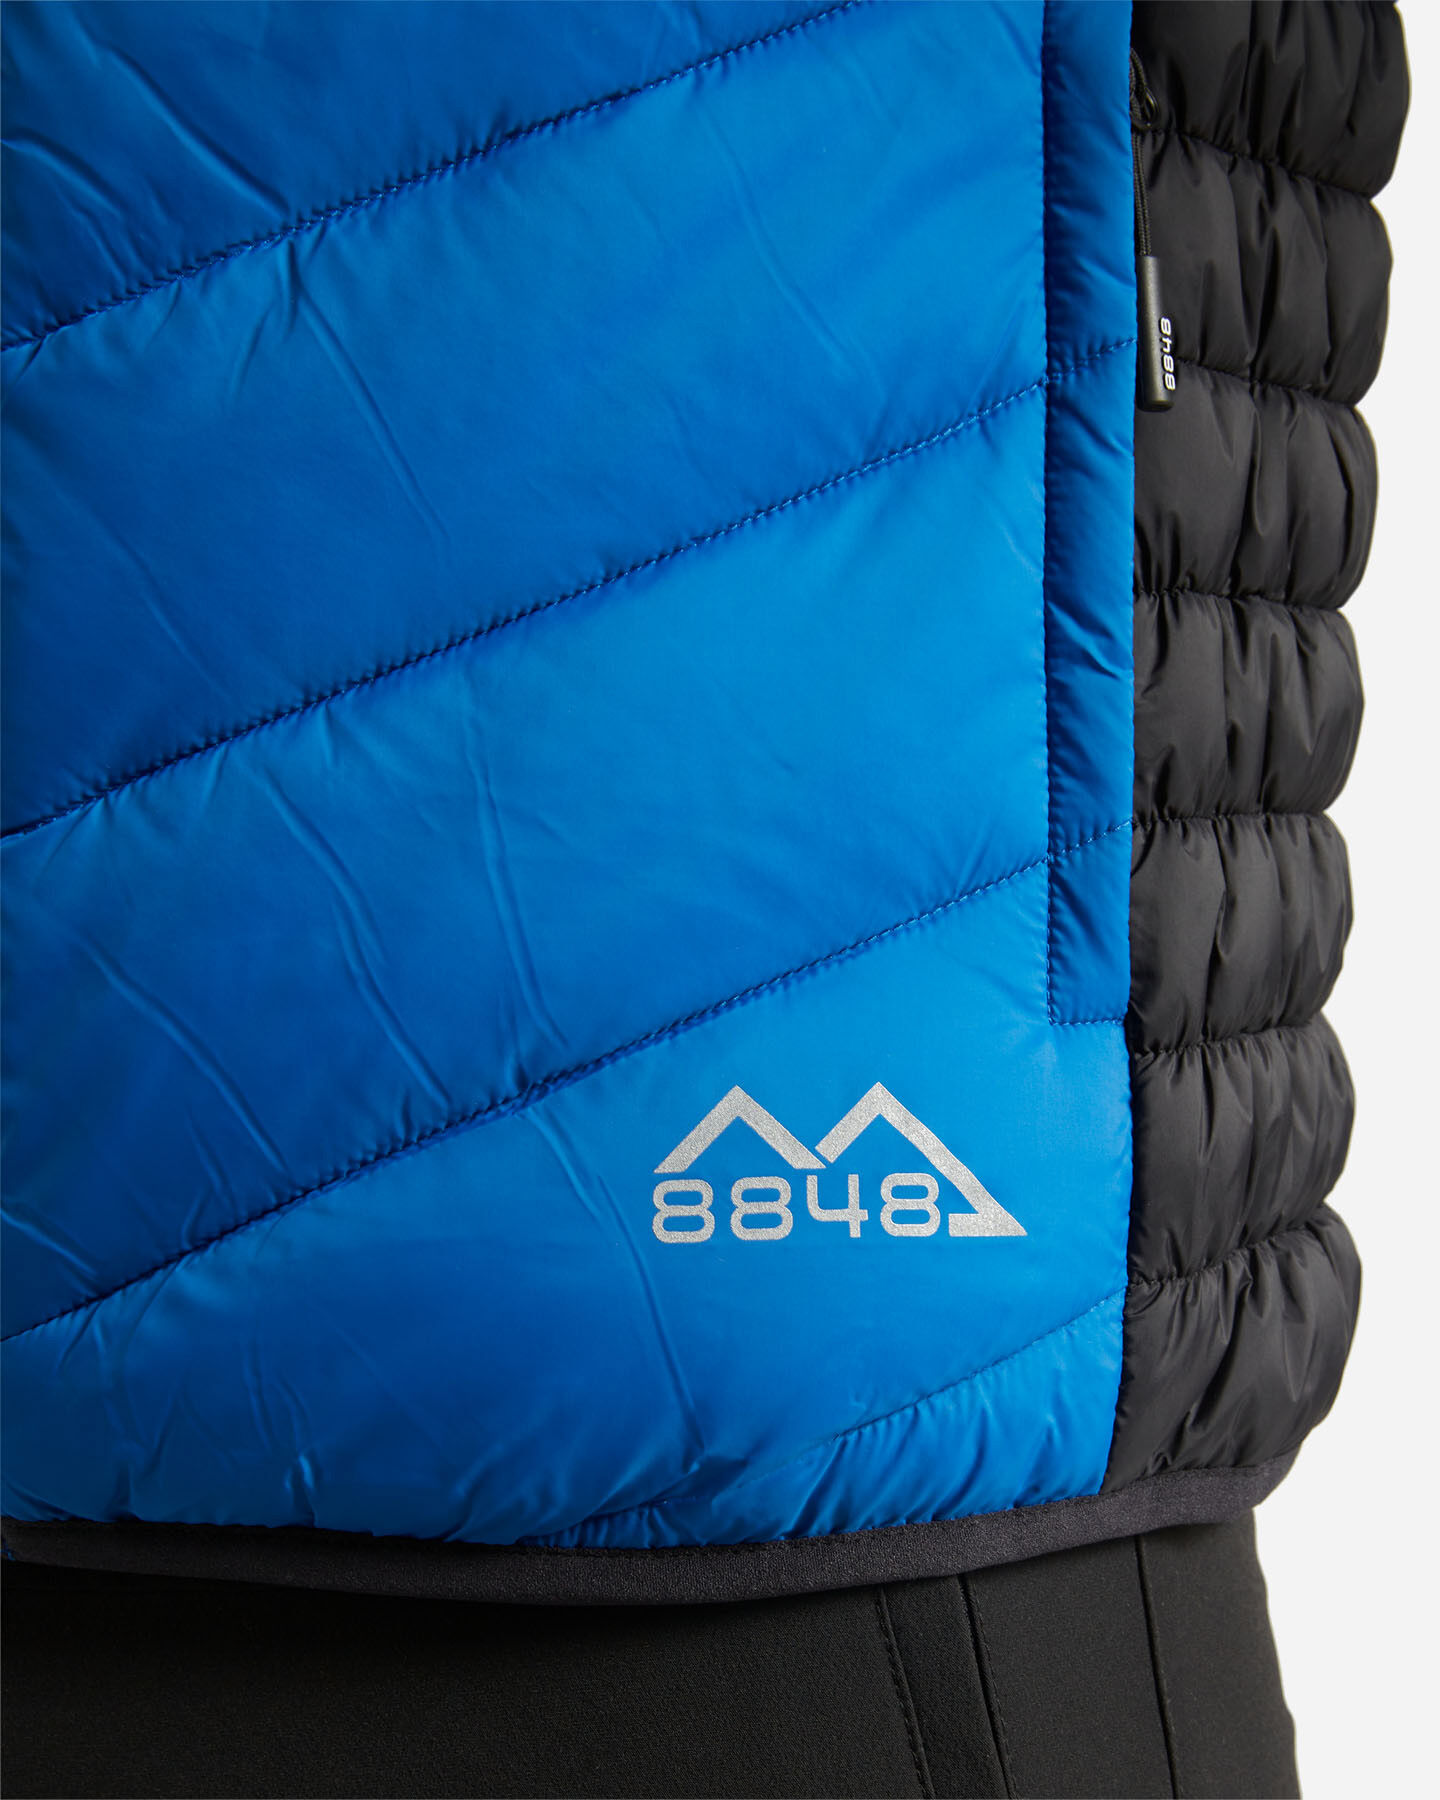  Gilet 8848 MOUNTAIN ESSENTIAL M S4126420|523/050|XS scatto 4